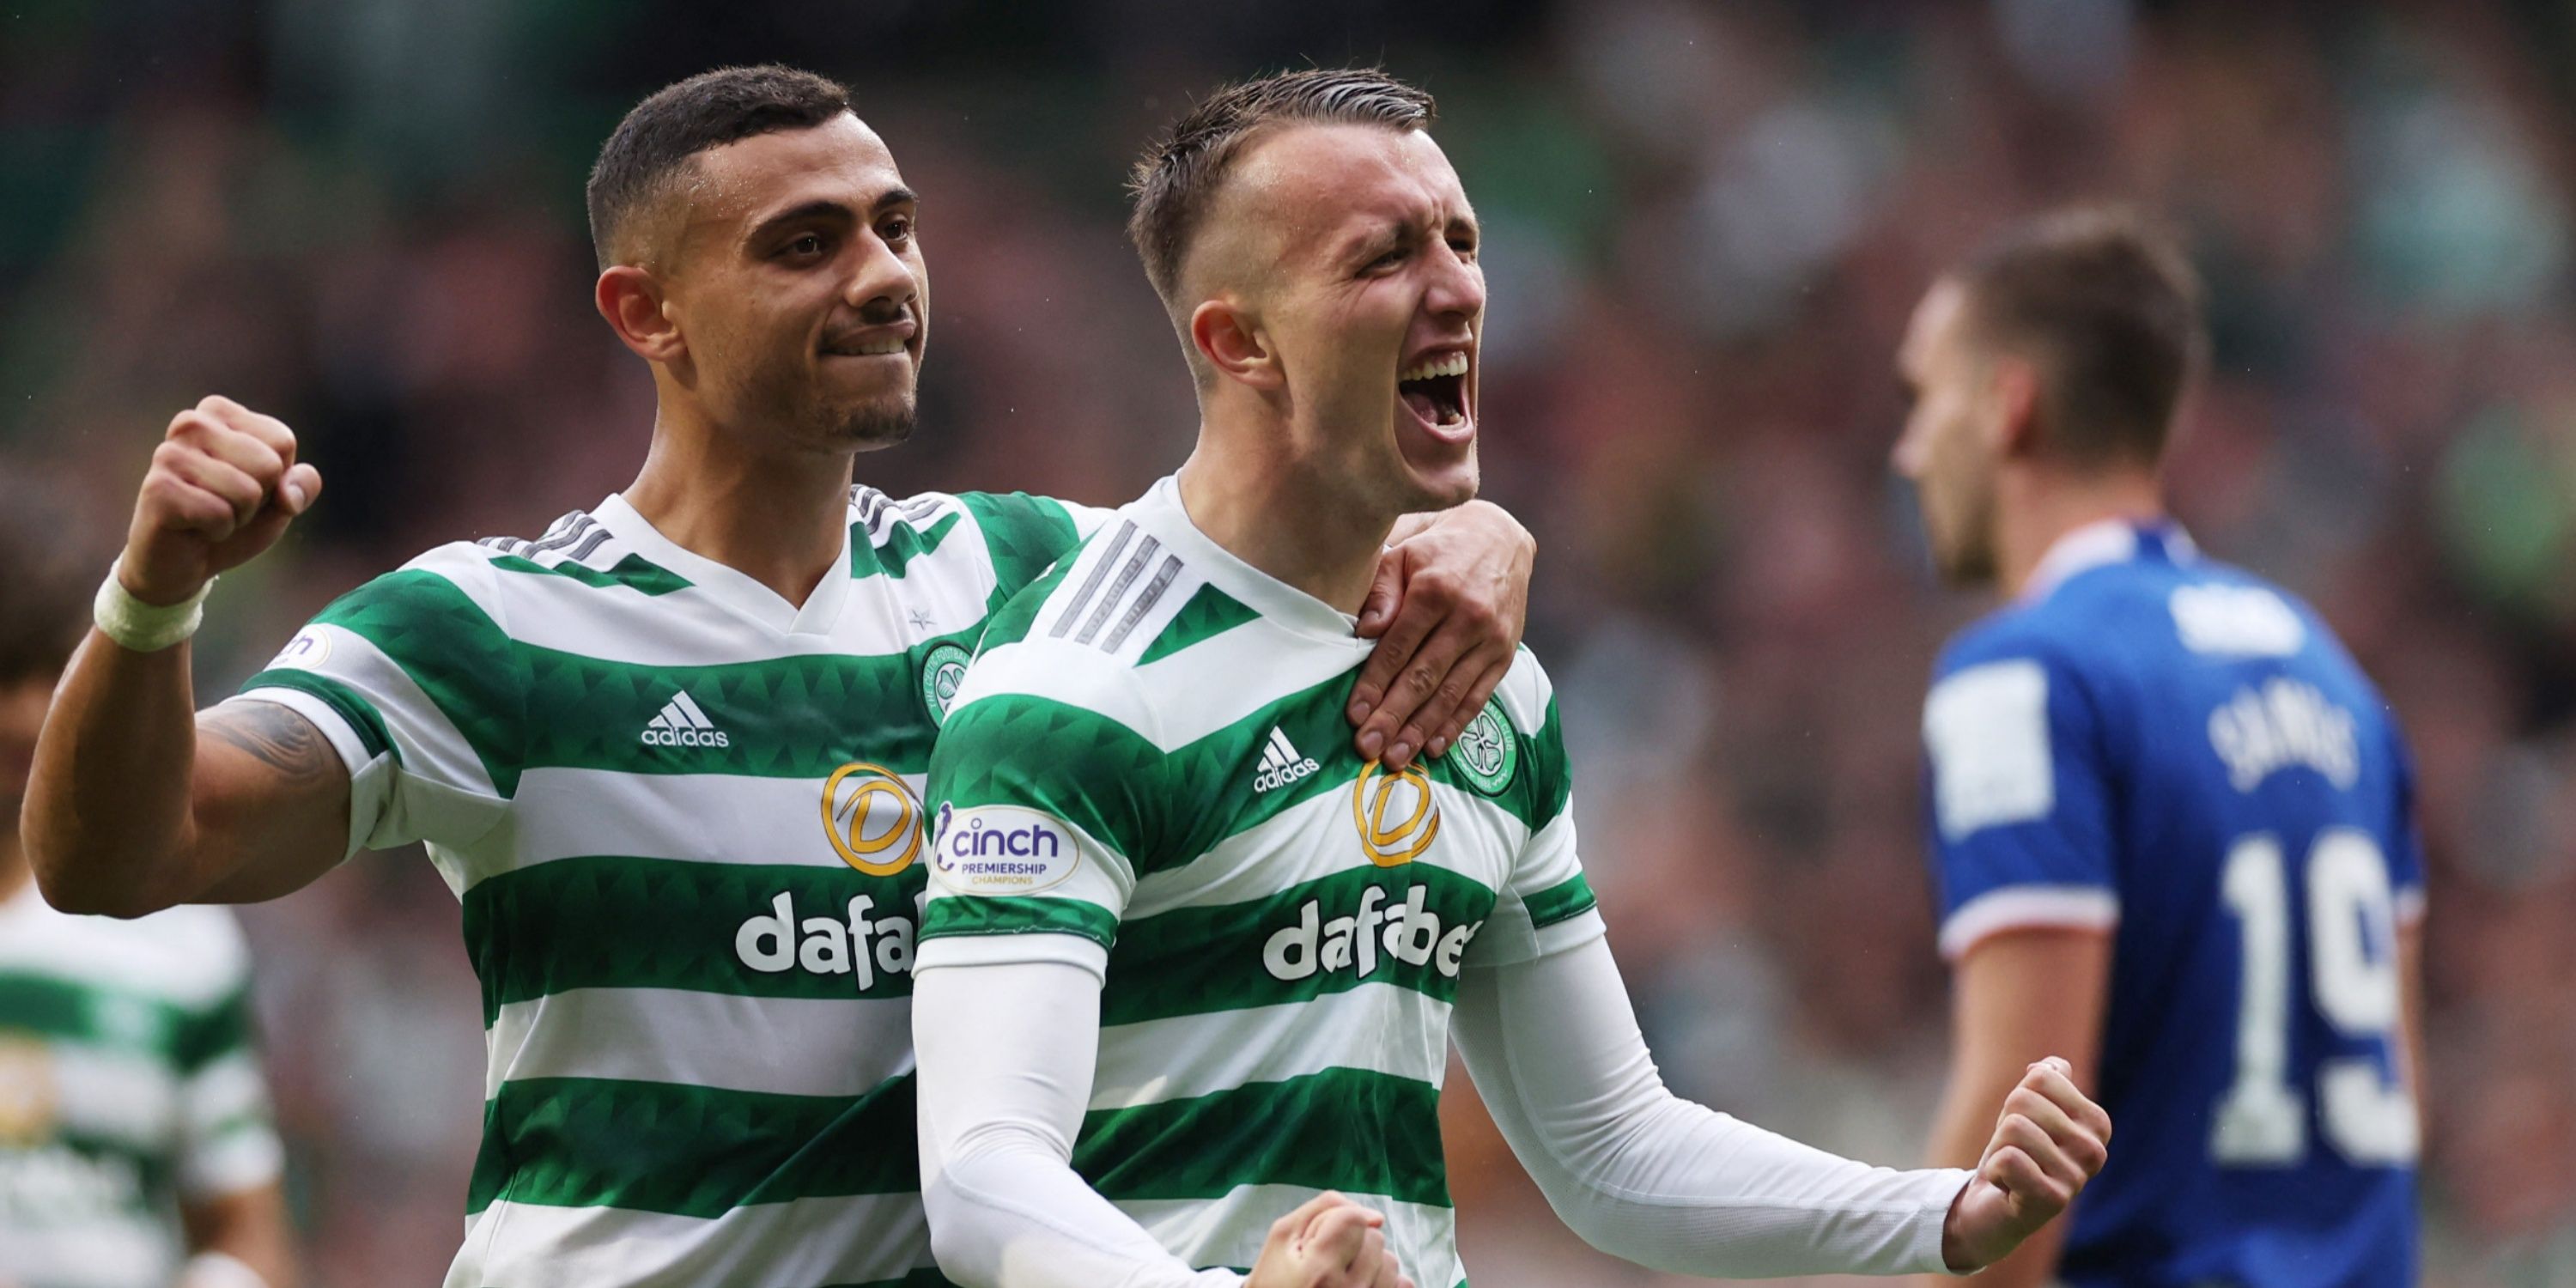 turnbull-celtic-premiership-kyogo-rodgers-ross-county